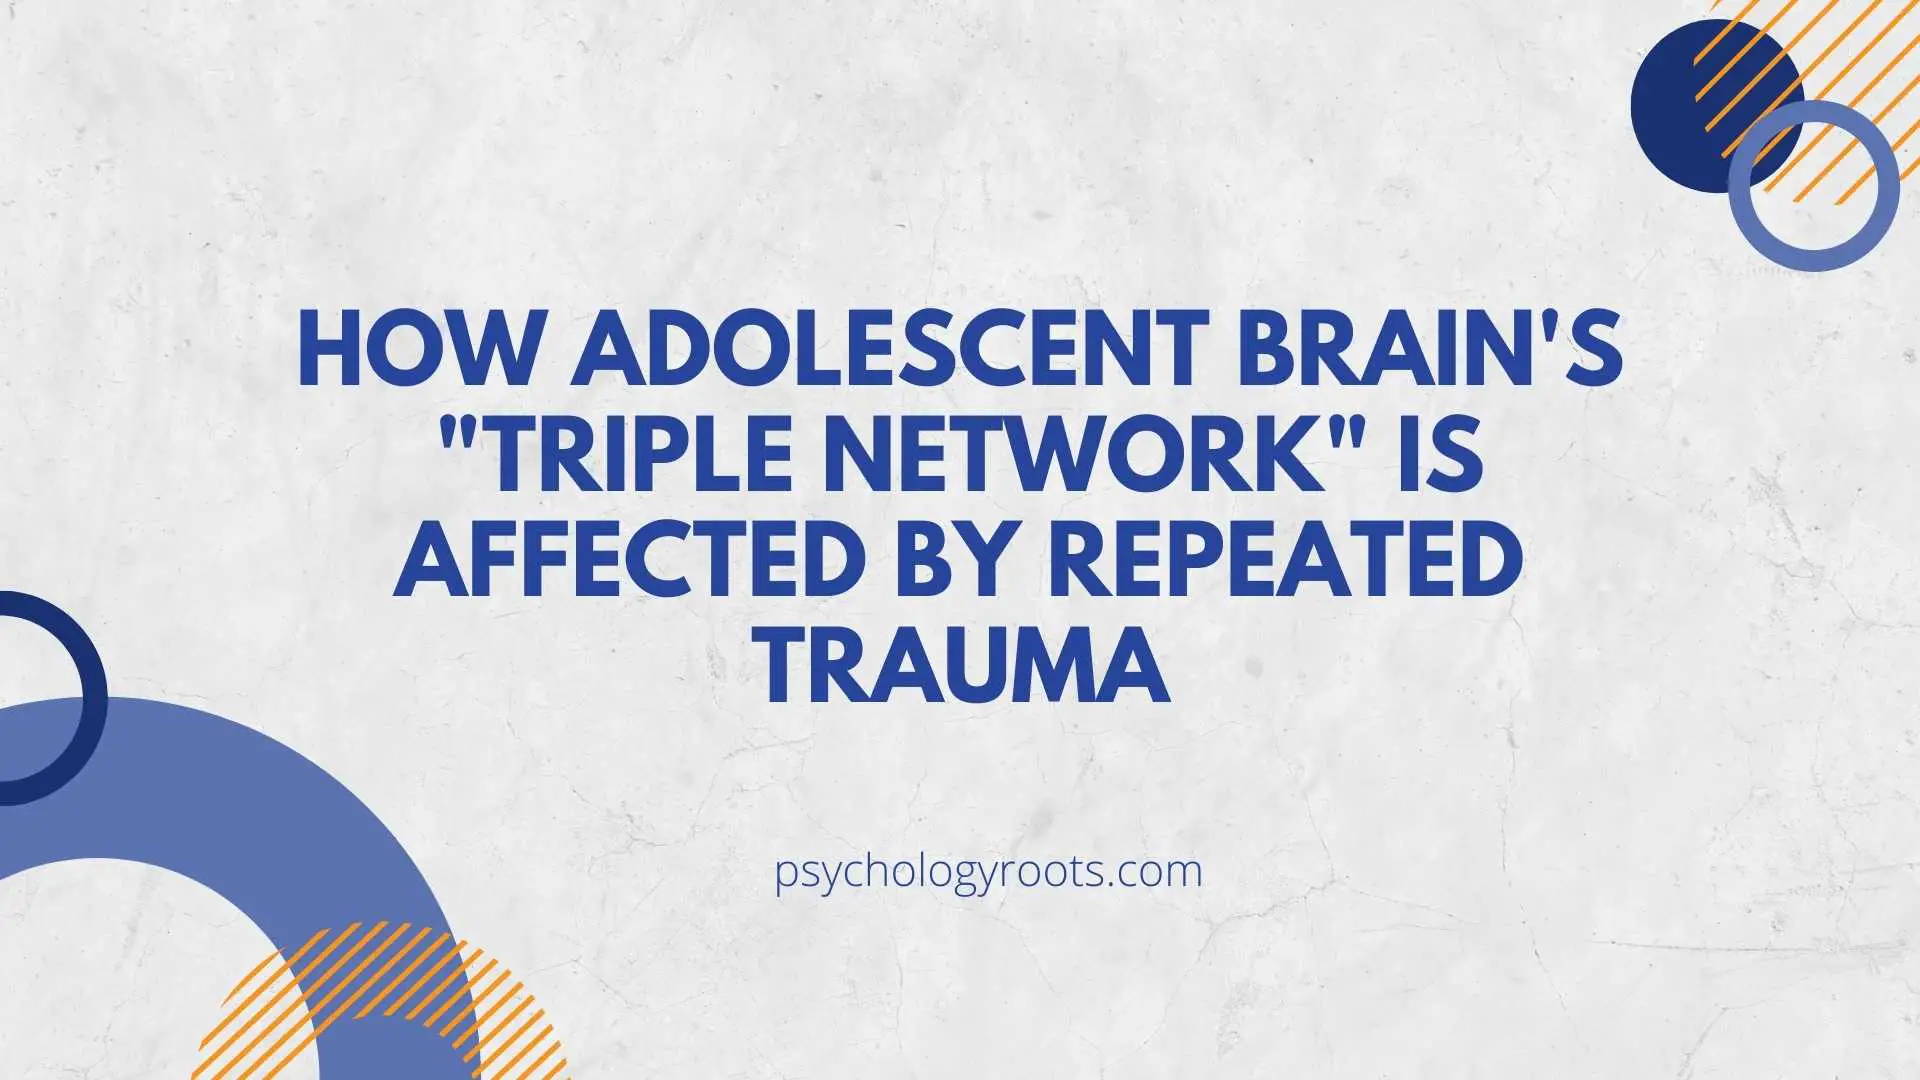 How Adolescent Brain's Triple Network Is Affected by Repeated Trauma